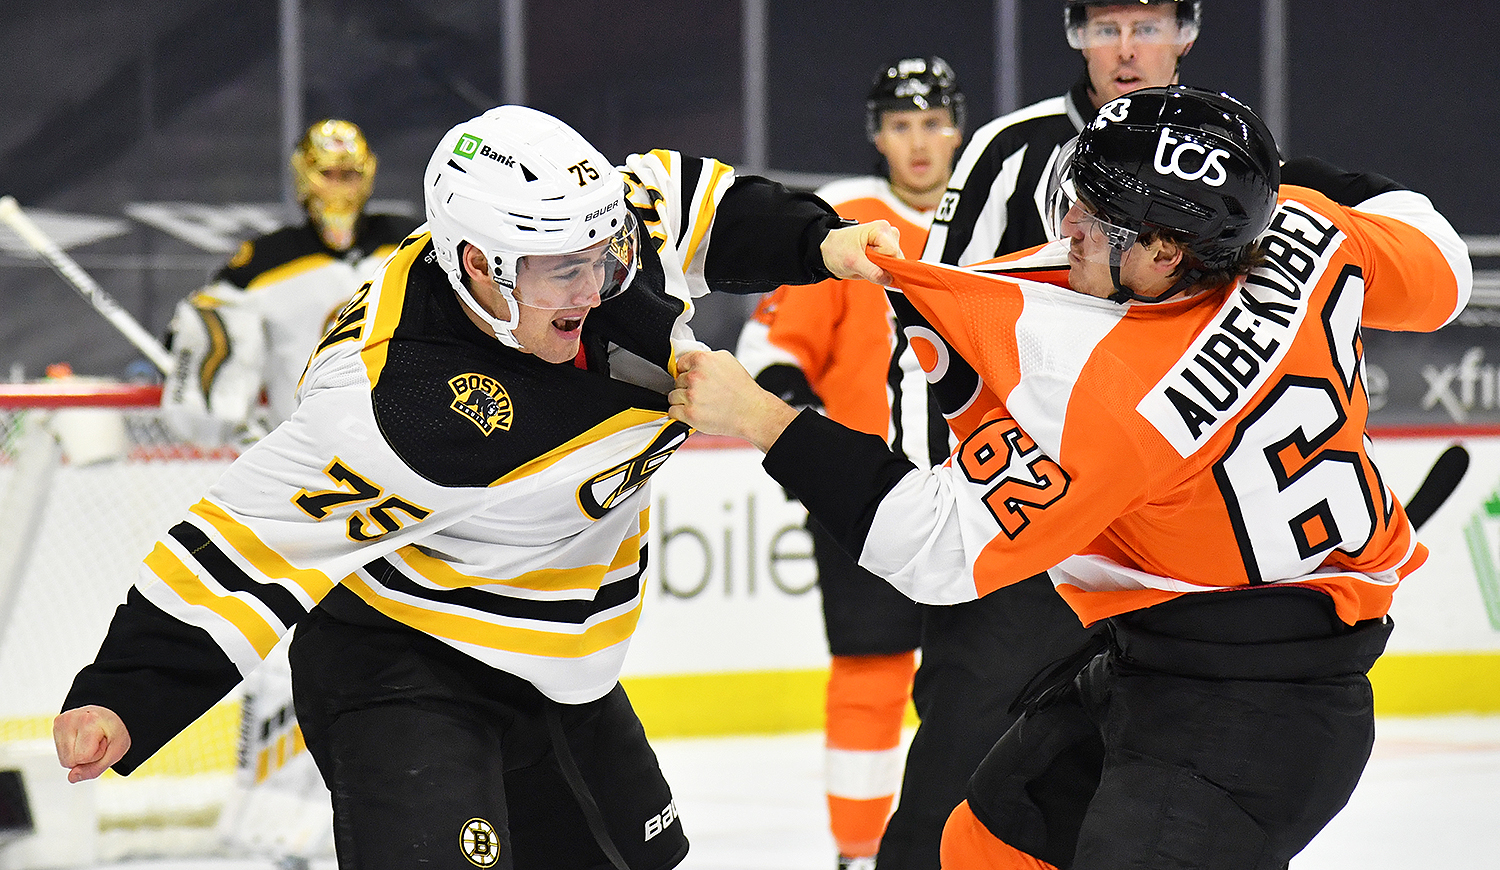 Brochures deal with more injuries, more pain from Bruins’ third period